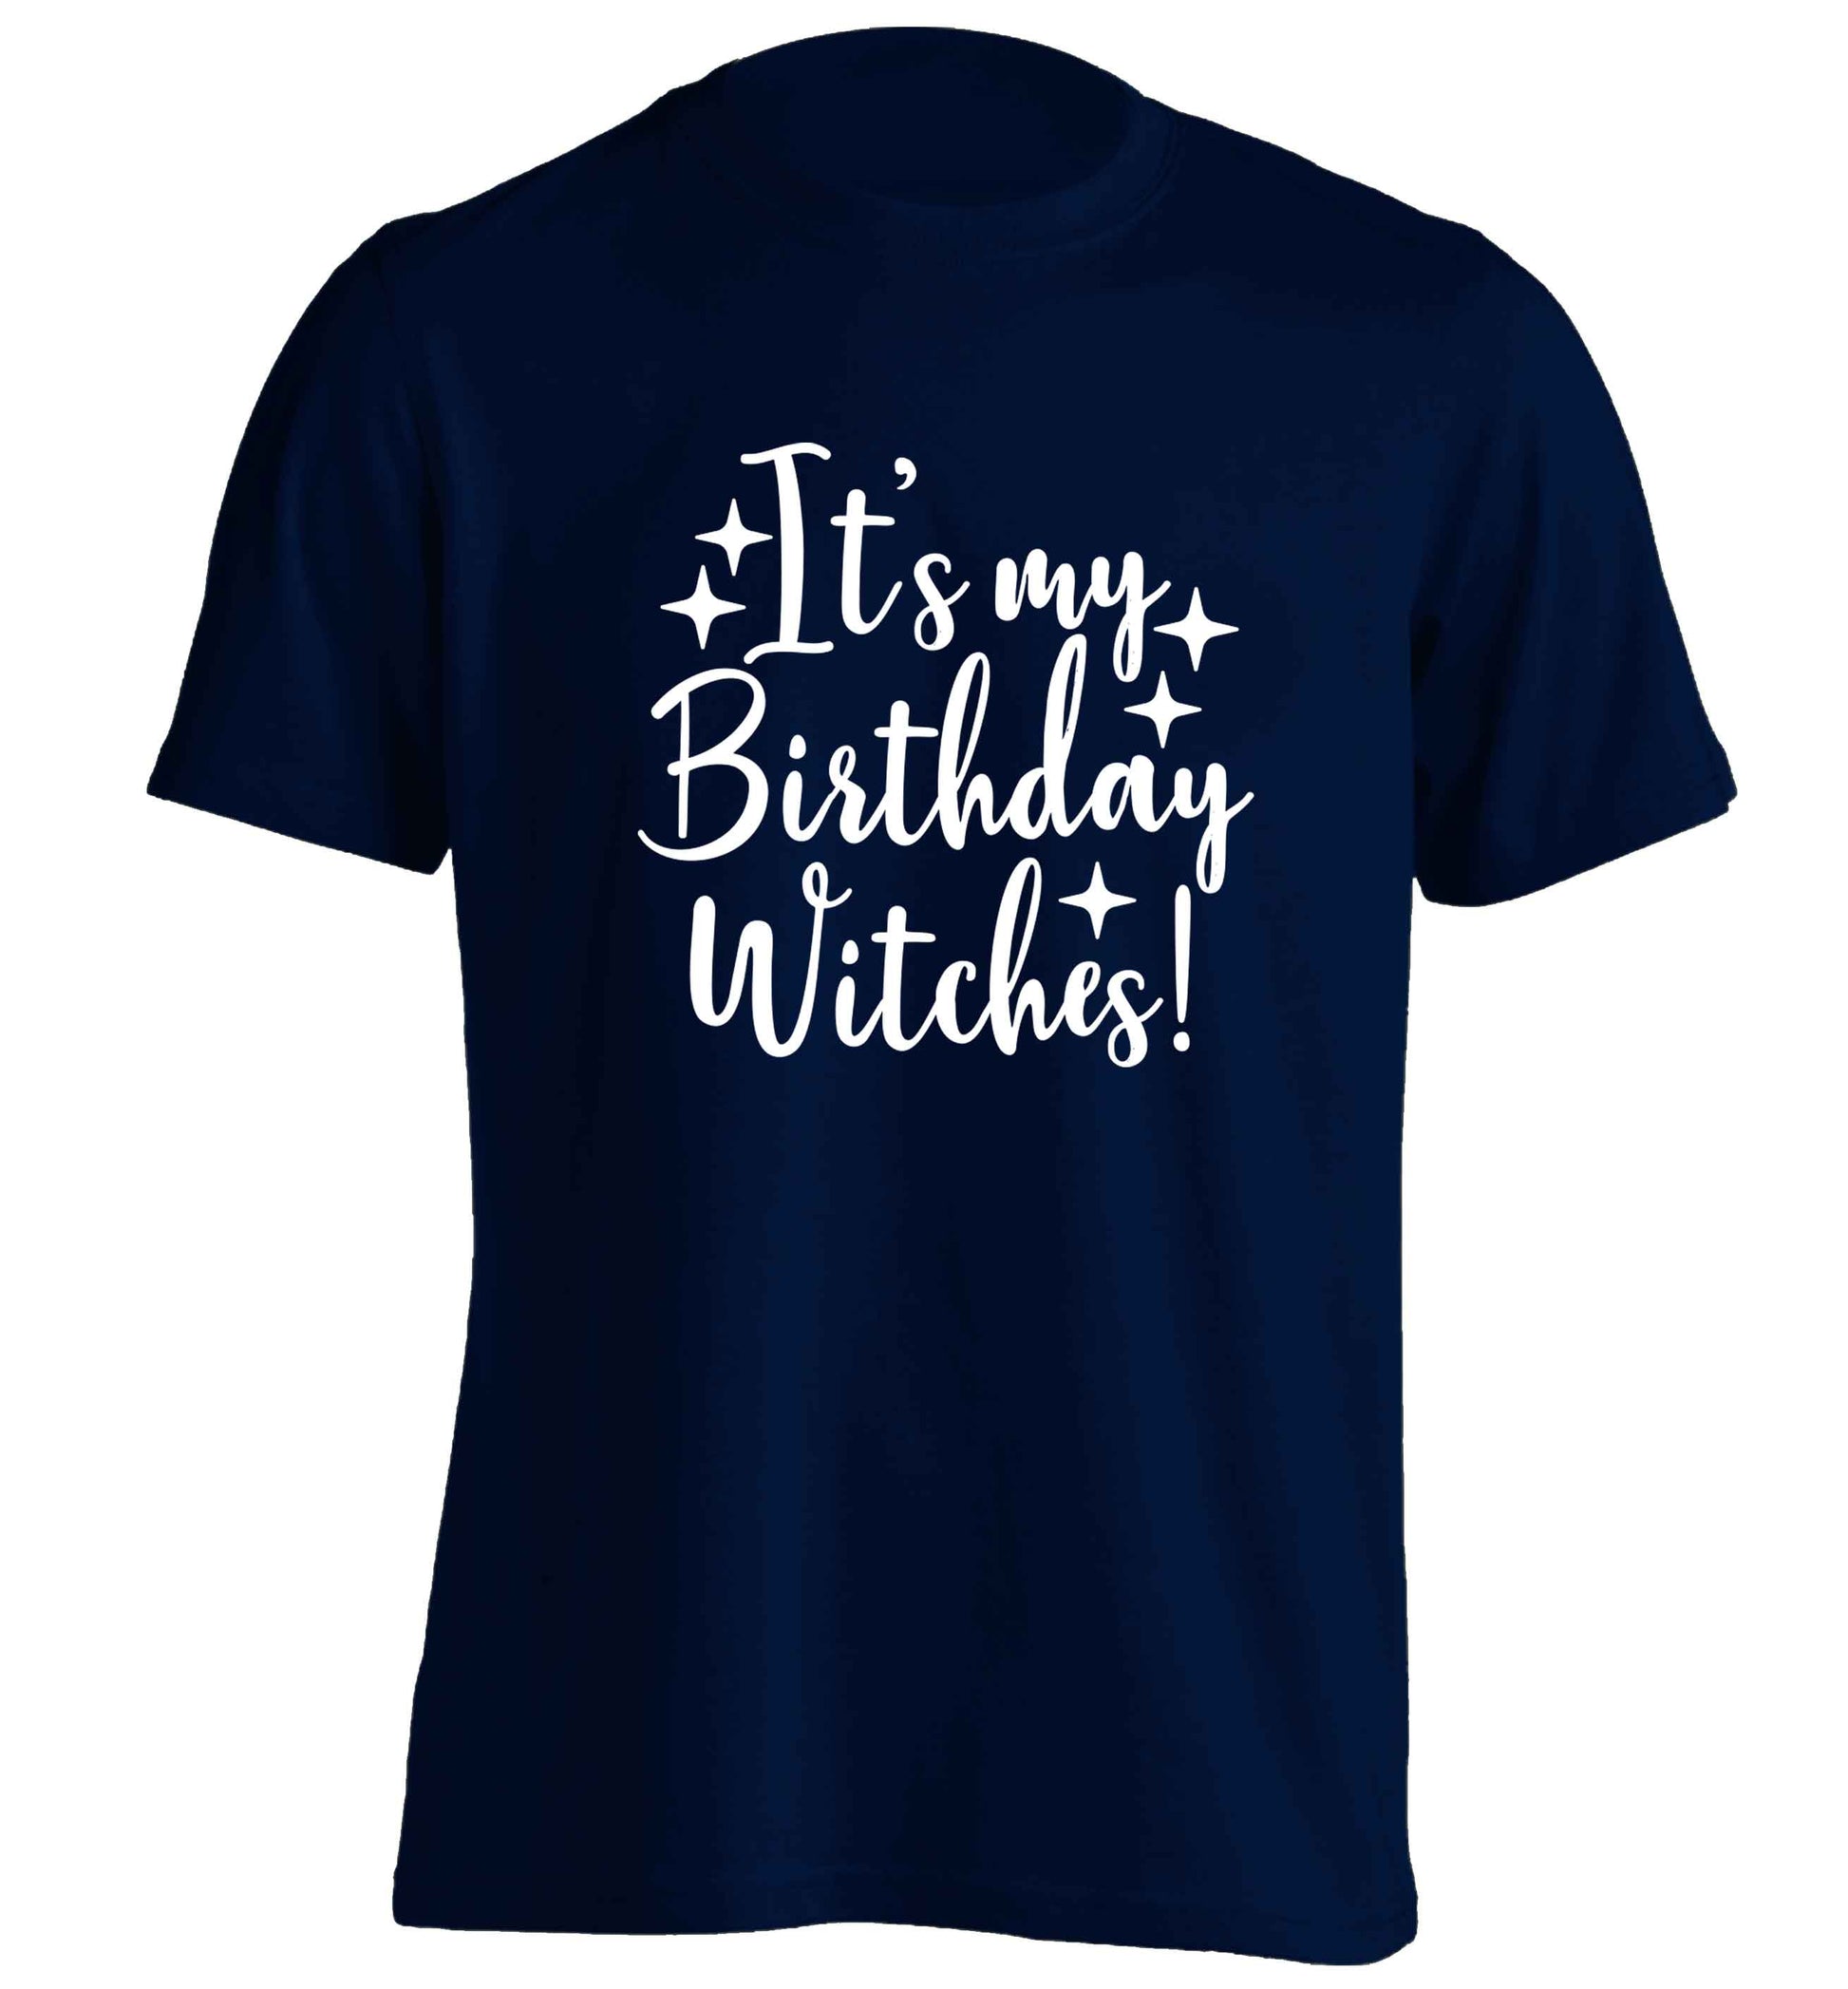 It's my birthday witches!adults unisex navy Tshirt 2XL